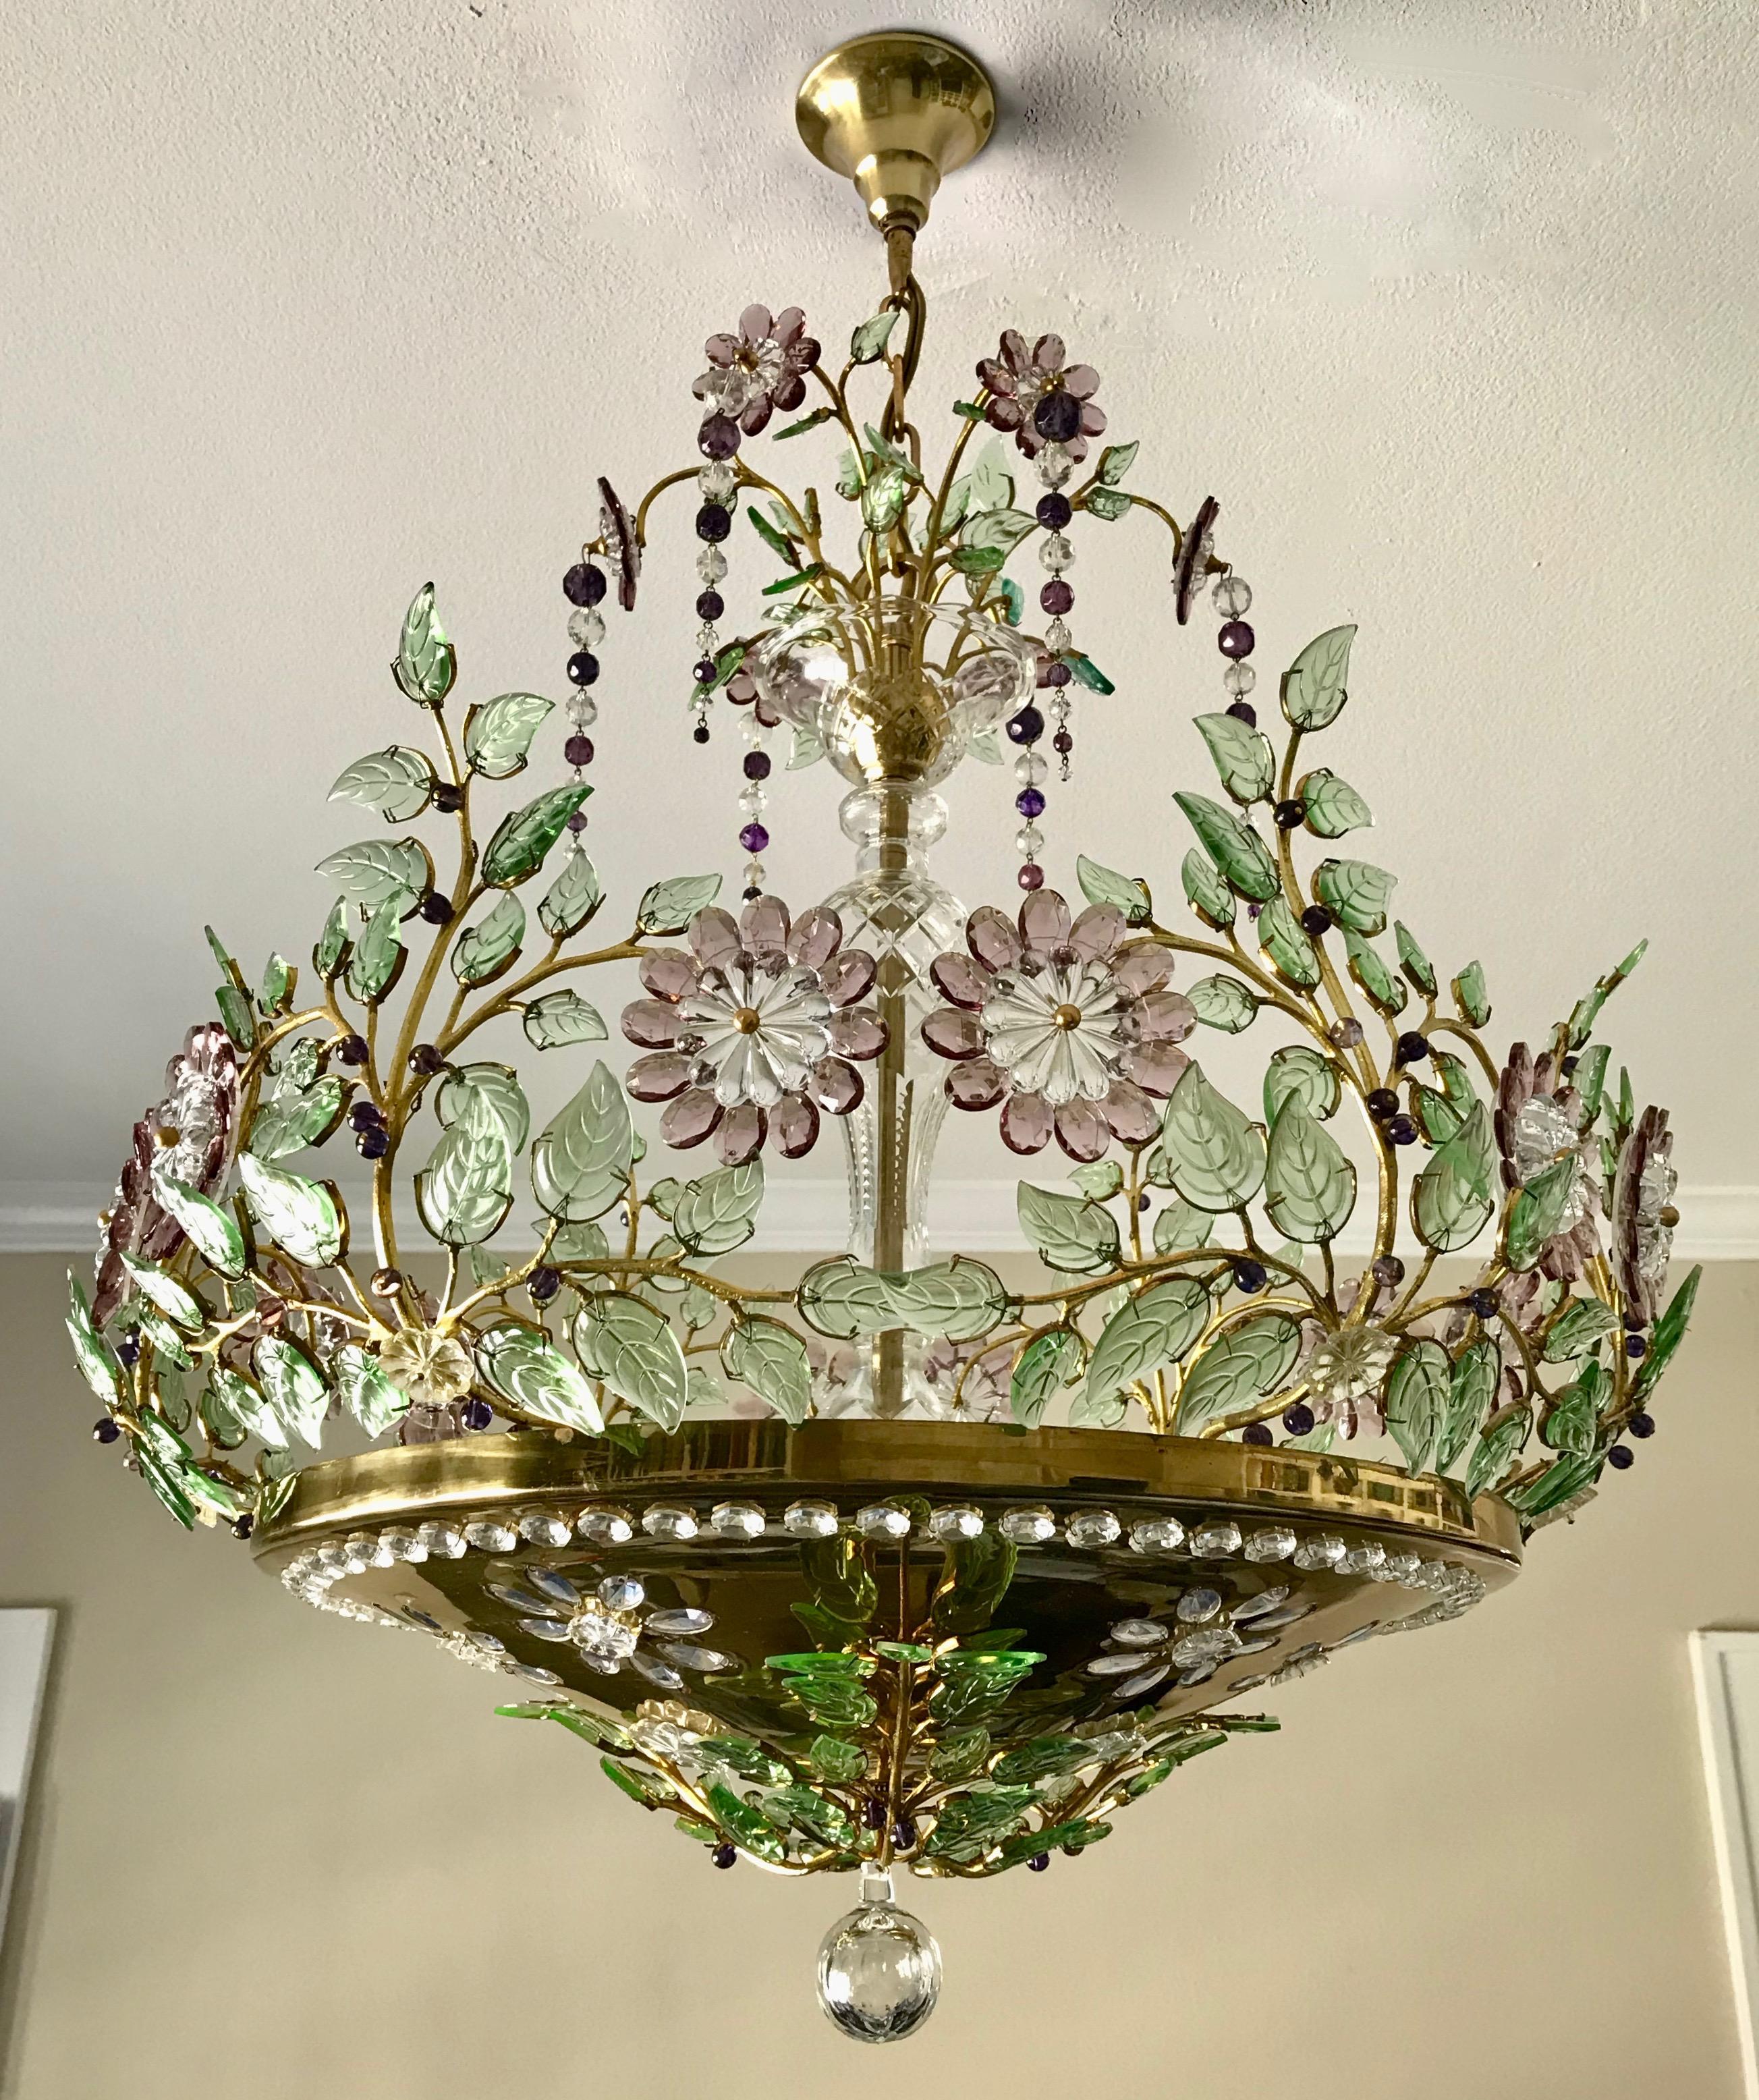 Chandelier composed of scrolling branches and glass leaves highlighted with amethyst and clear glass flowers. 6 - A or Edison base light bulbs concealed within the brass bowl illuminate the glass elements above as well as the brass bowl. Newly wired